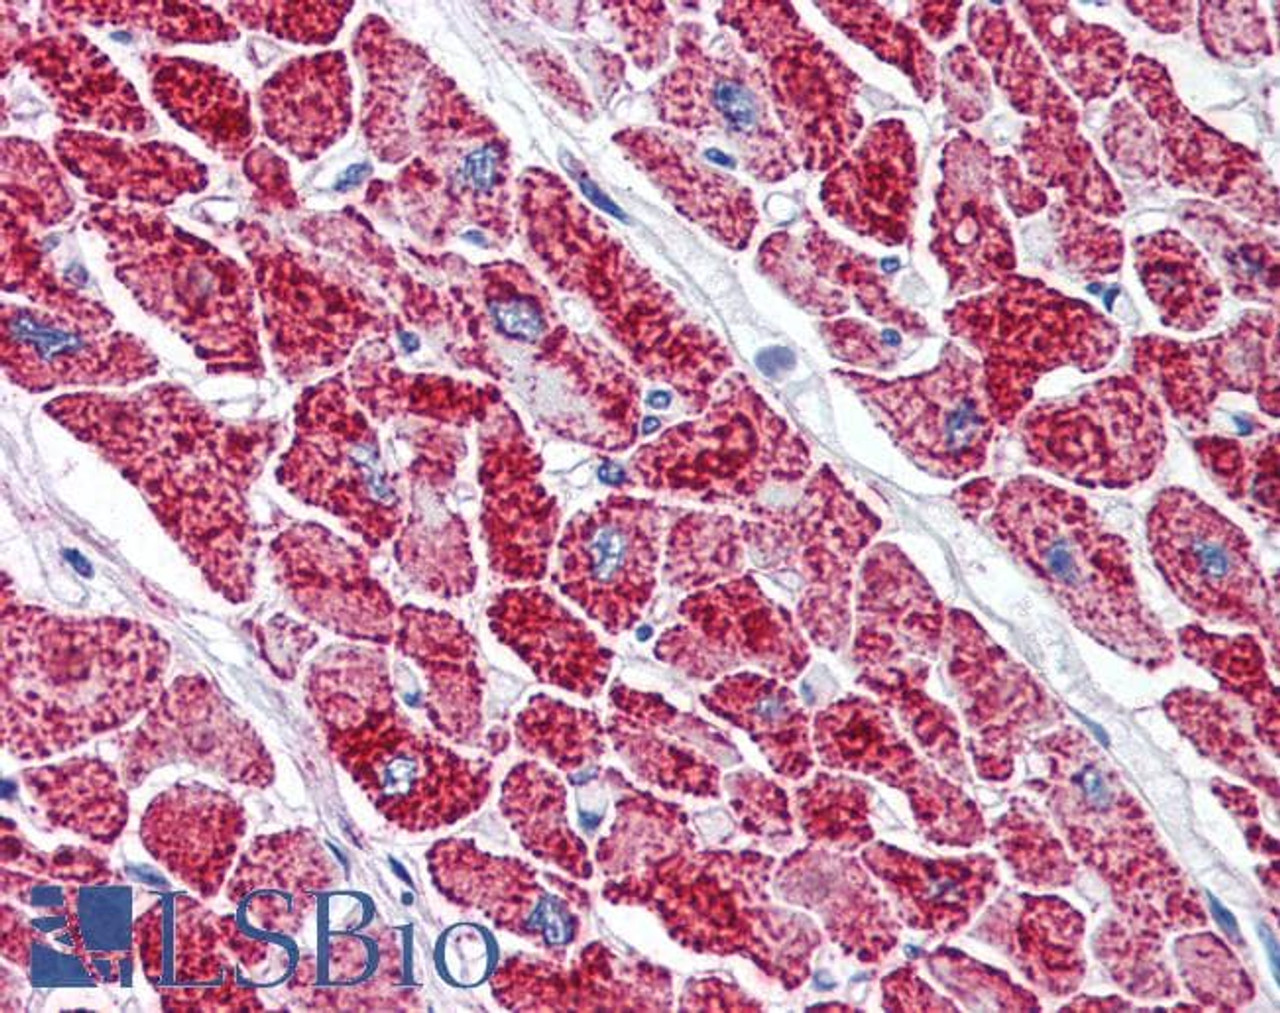 46-569 (5ug/ml) staining of paraffin embedded Human Heart. Steamed antigen retrieval with citrate buffer pH 6, AP-staining. <strong>This data is from a previous batch, not on sale.</strong>